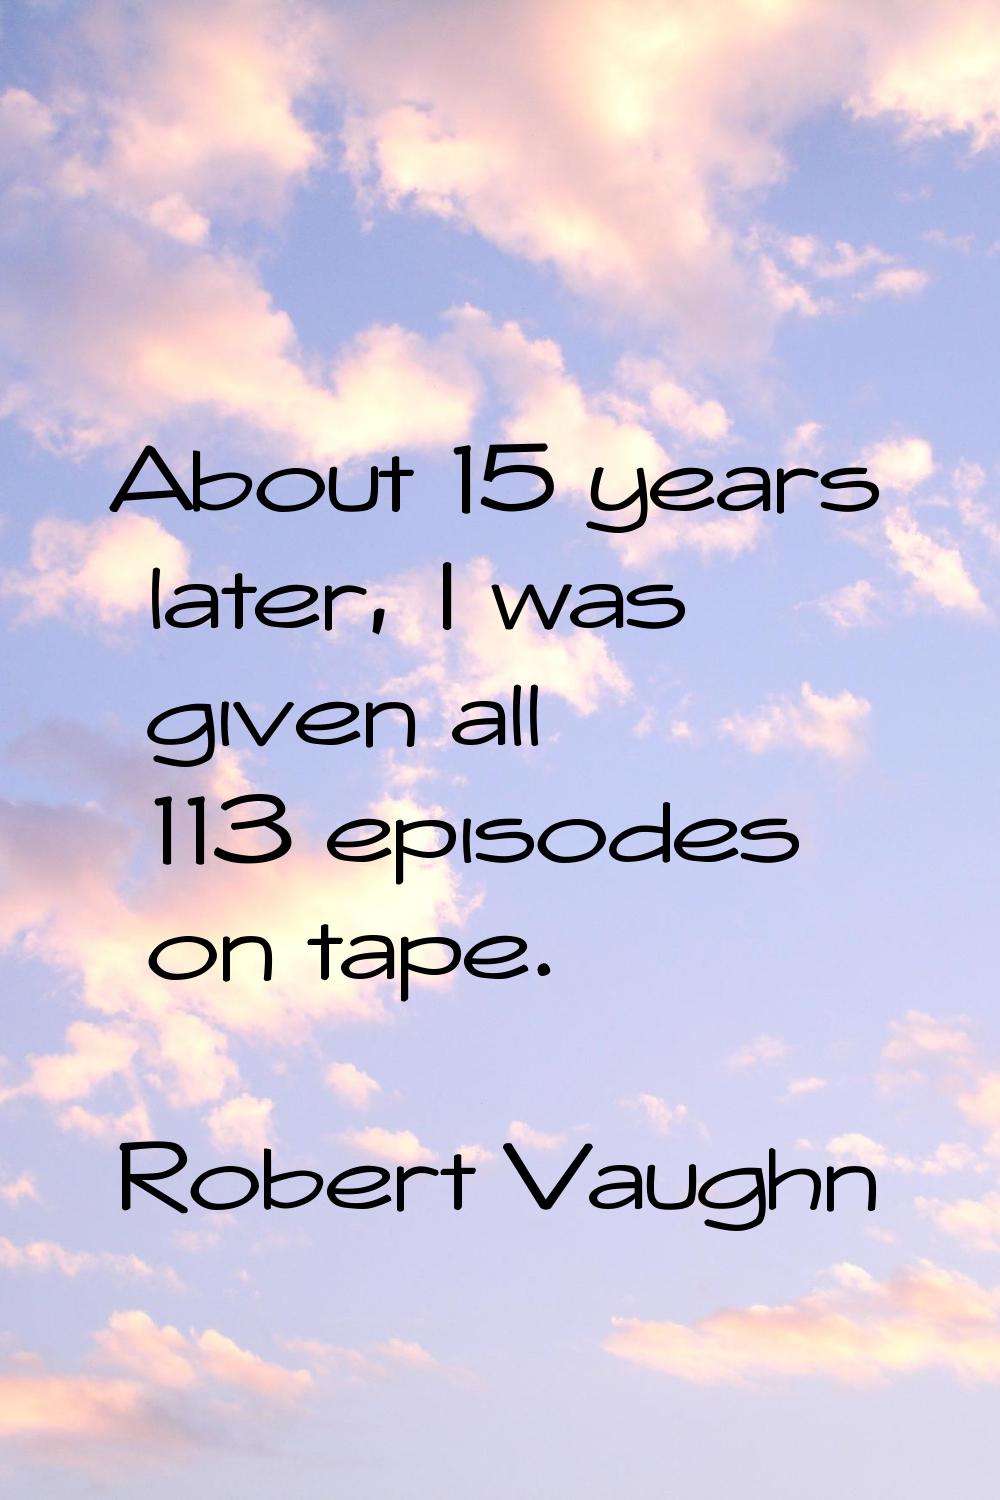 About 15 years later, I was given all 113 episodes on tape.